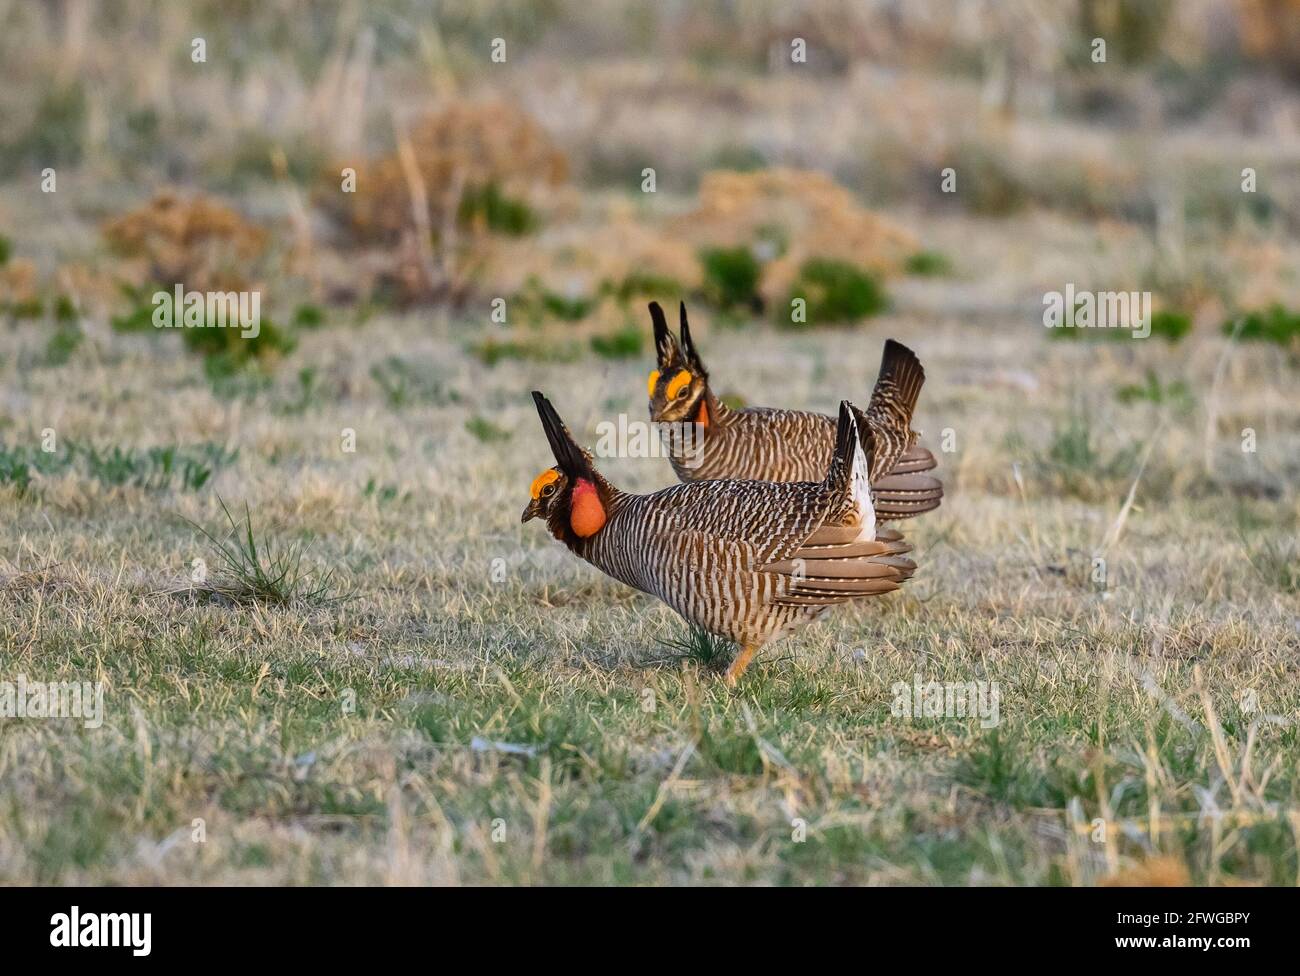 Two rival male Lesser Prairie Chickens (Tympanuchus pallidicinctus) facing off in courtship display at their lek. Smoky Valley Ranch, Kansas, USA. Stock Photo